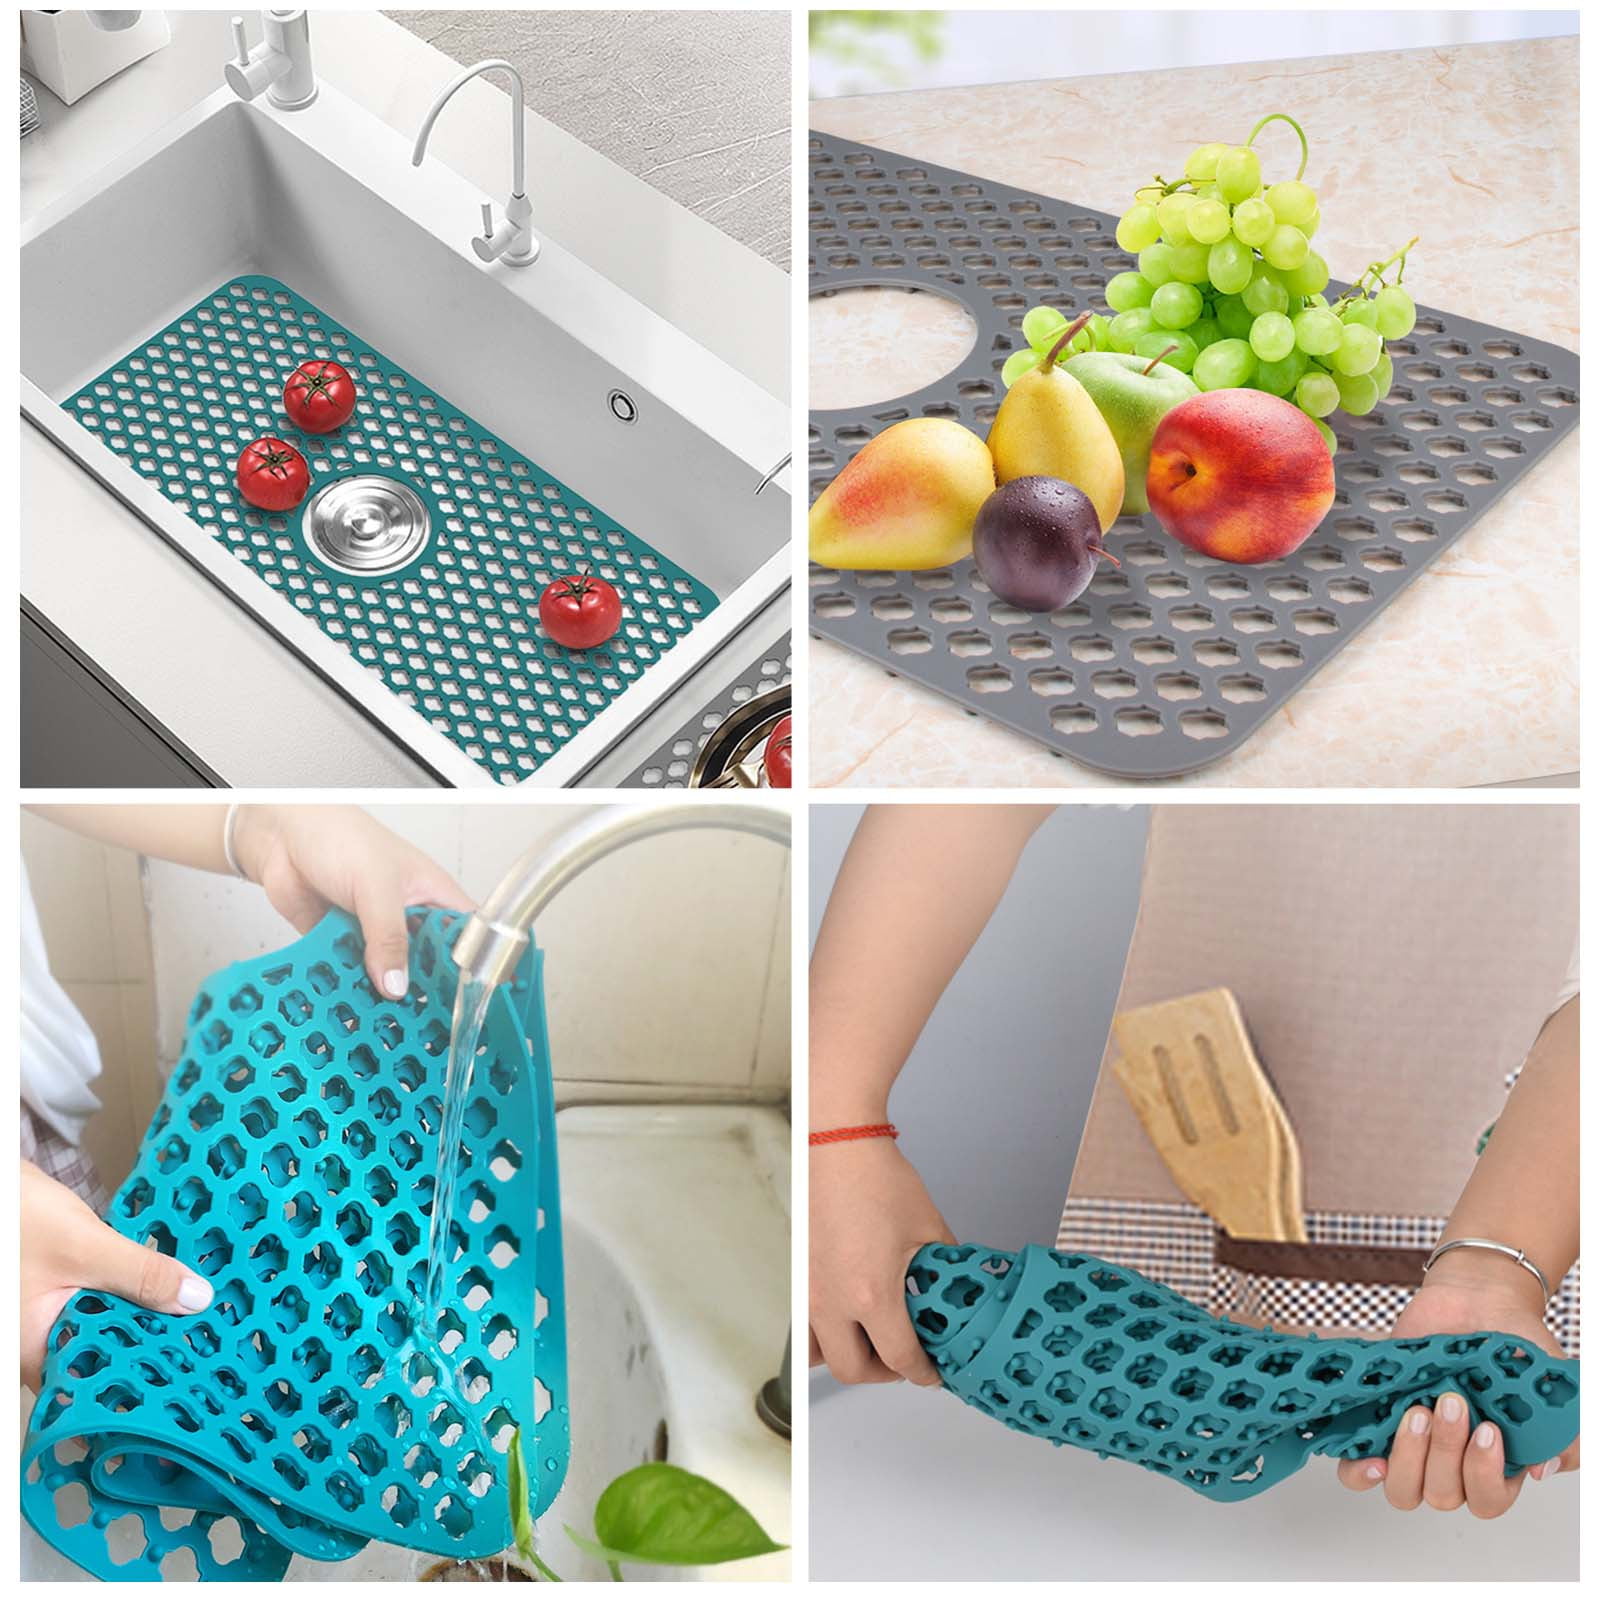 Tarmeek Silicone Sink Protector, Rear Drain Kitchen Sink Mats Grid  Accessory,1 PC Folding Non-slip Sink Mat for Bottom of Farmhouse Stainless  Steel